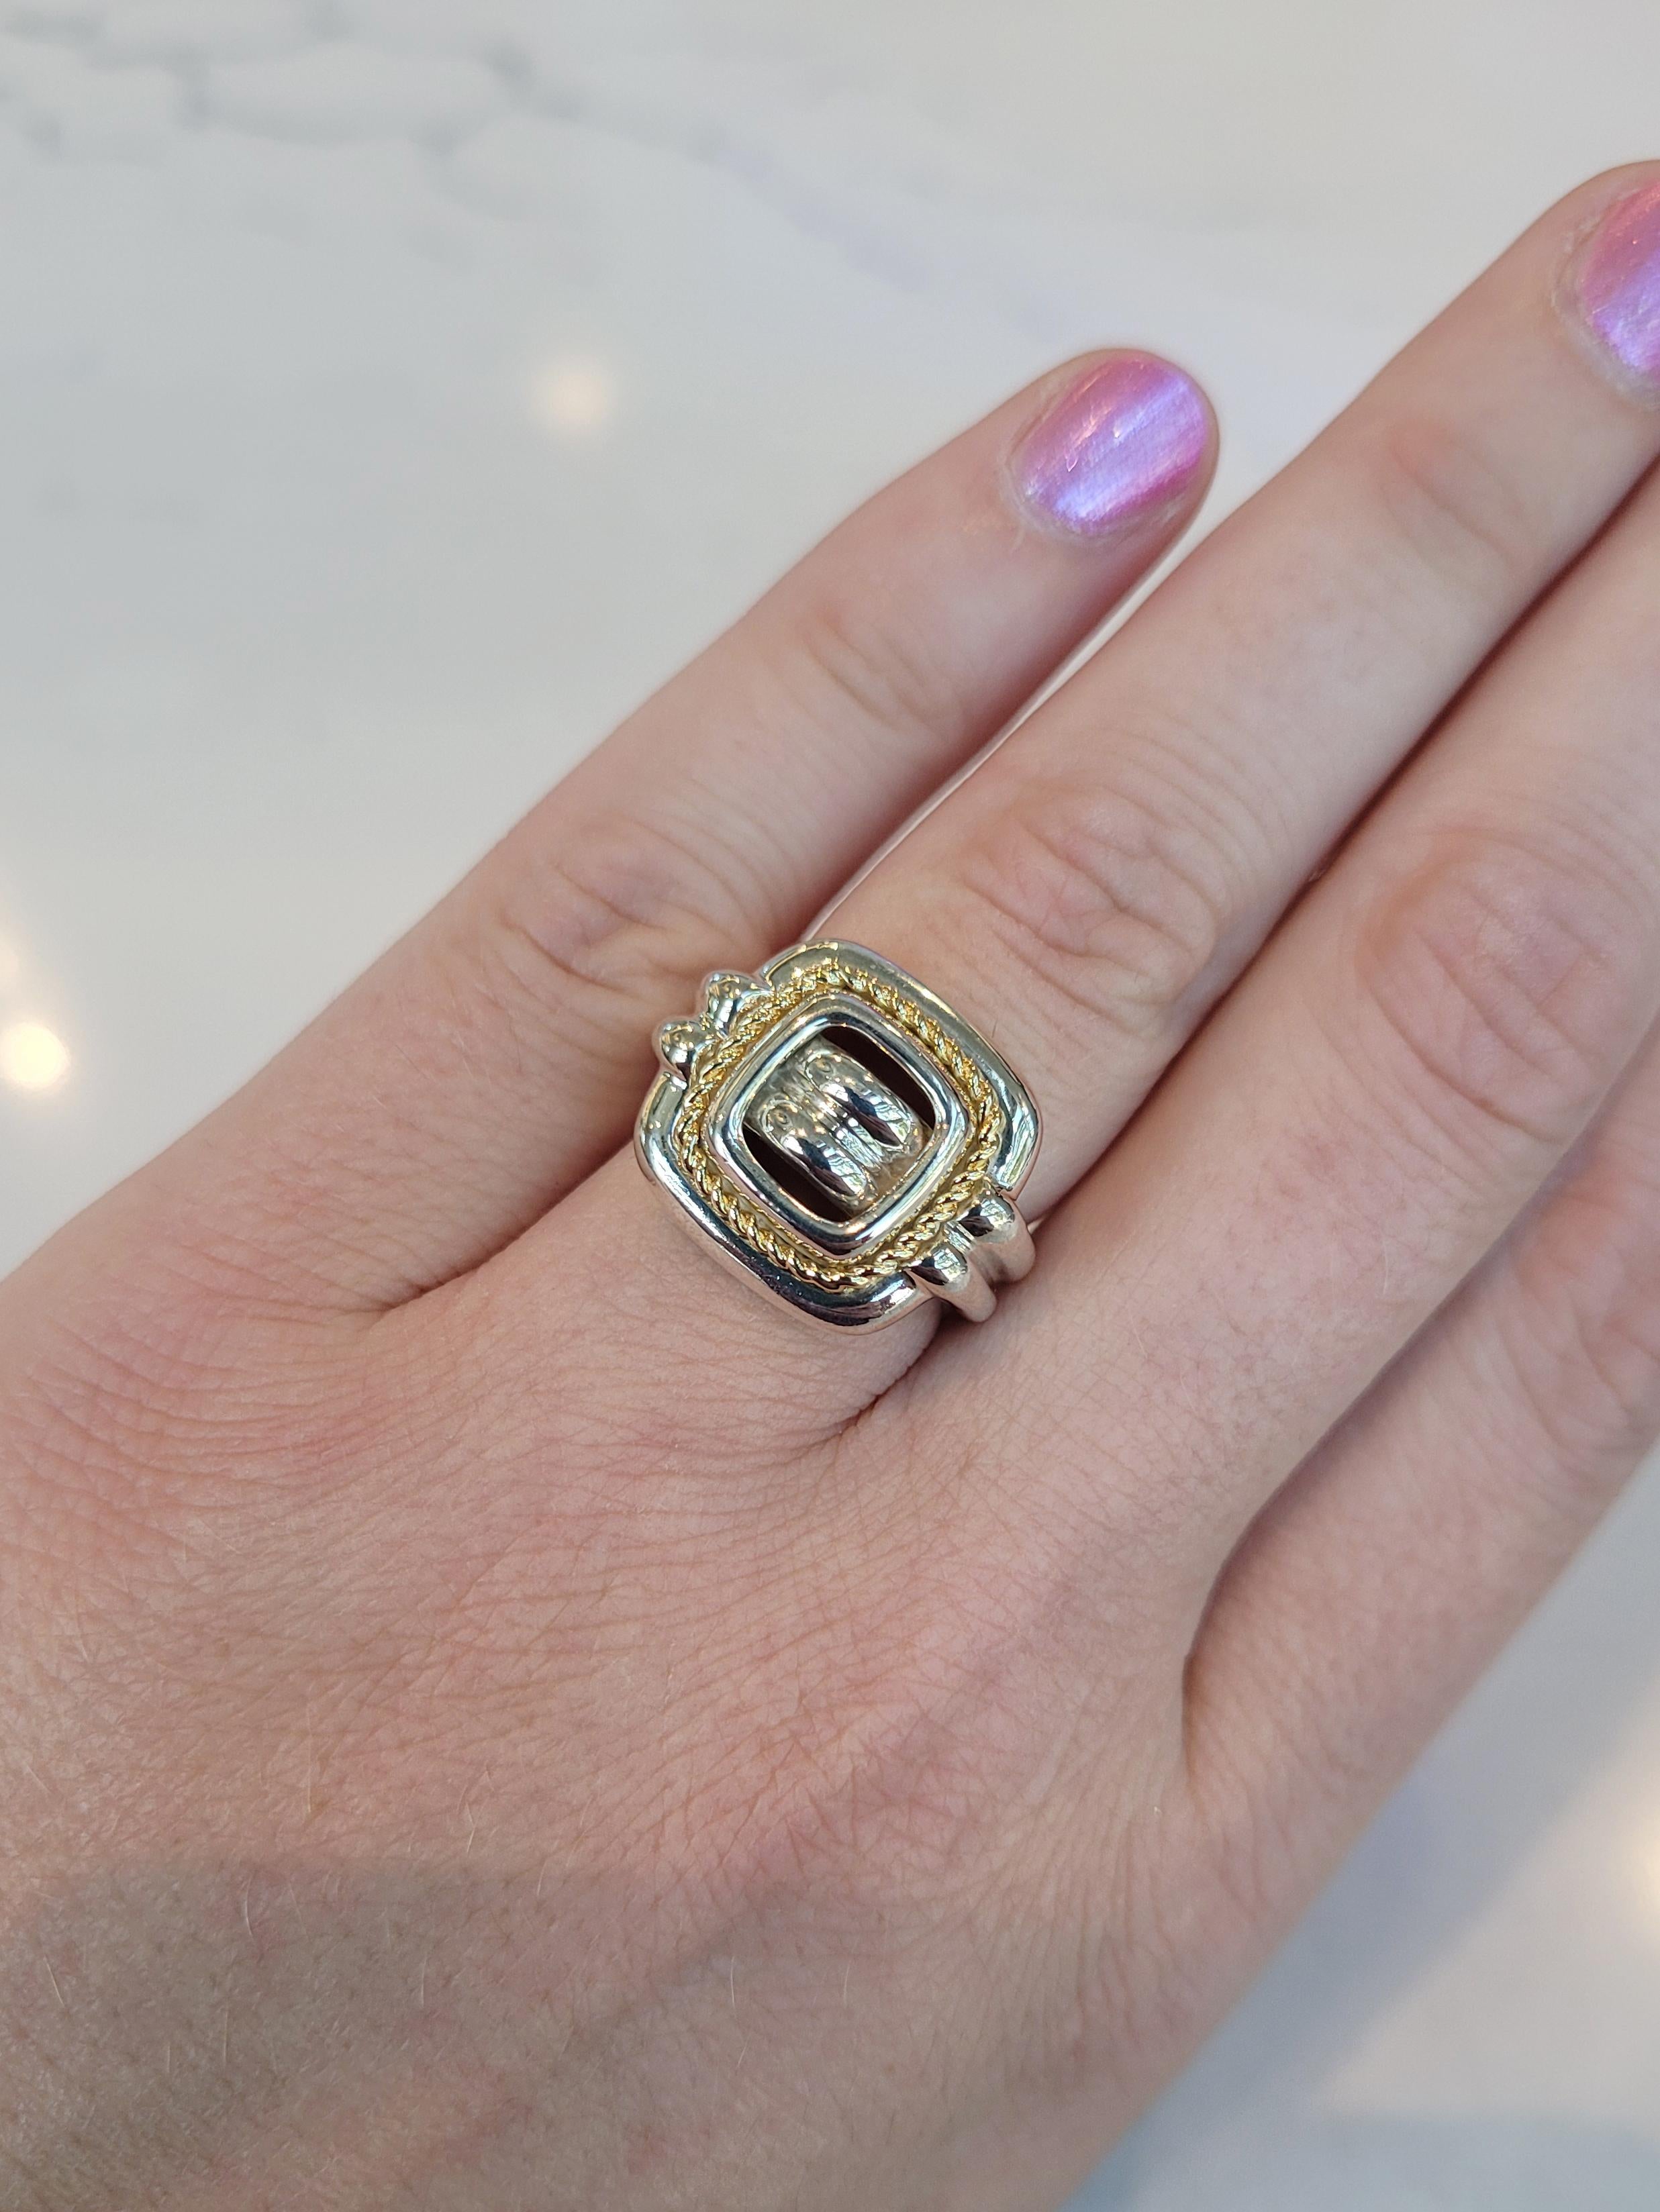 Vintage Tiffany & Co. sterling silver ring featuring an 18K yellow gold twist accent.